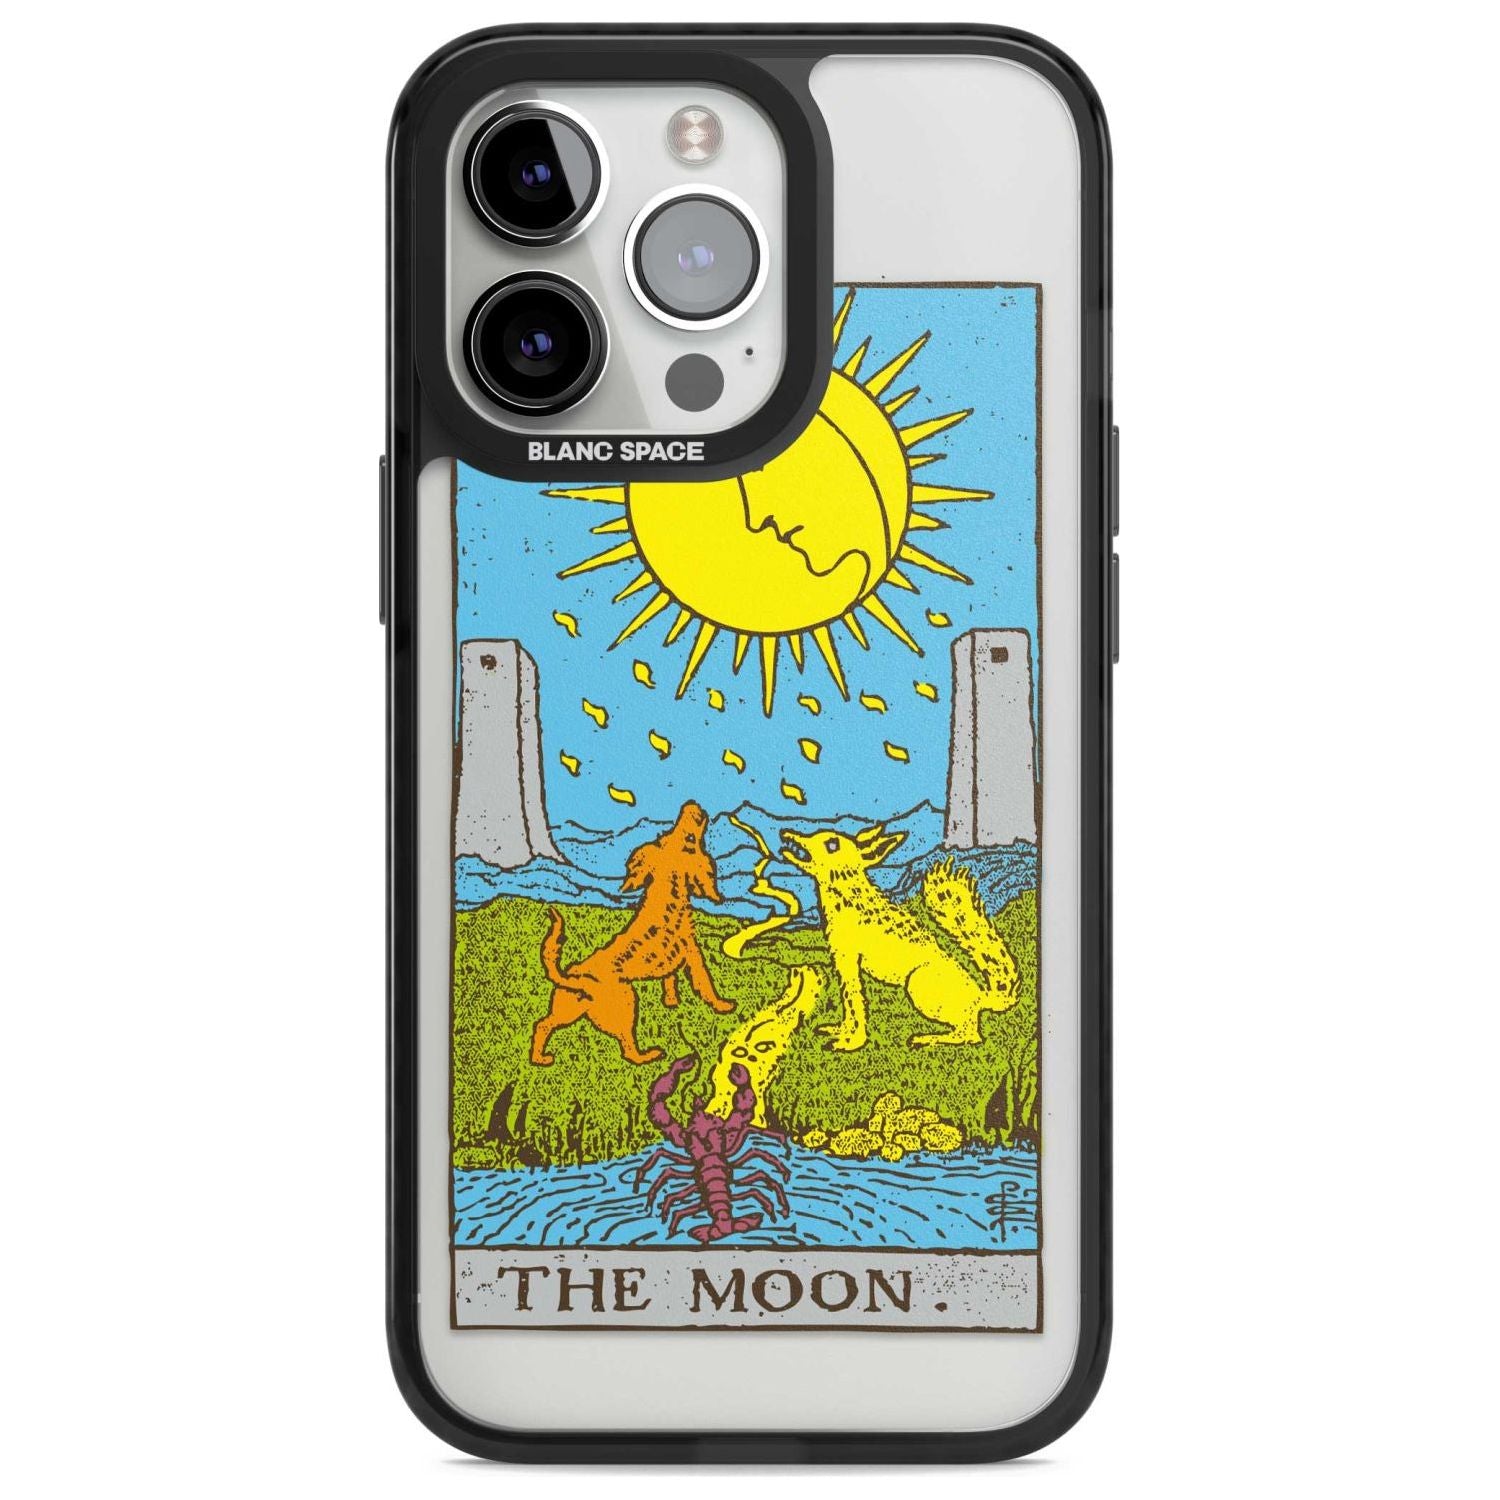 Personalised The Moon Tarot Card - Colour Custom Phone Case iPhone 15 Pro Max / Magsafe Black Impact Case,iPhone 15 Pro / Magsafe Black Impact Case,iPhone 14 Pro Max / Magsafe Black Impact Case,iPhone 14 Pro / Magsafe Black Impact Case,iPhone 13 Pro / Magsafe Black Impact Case Blanc Space